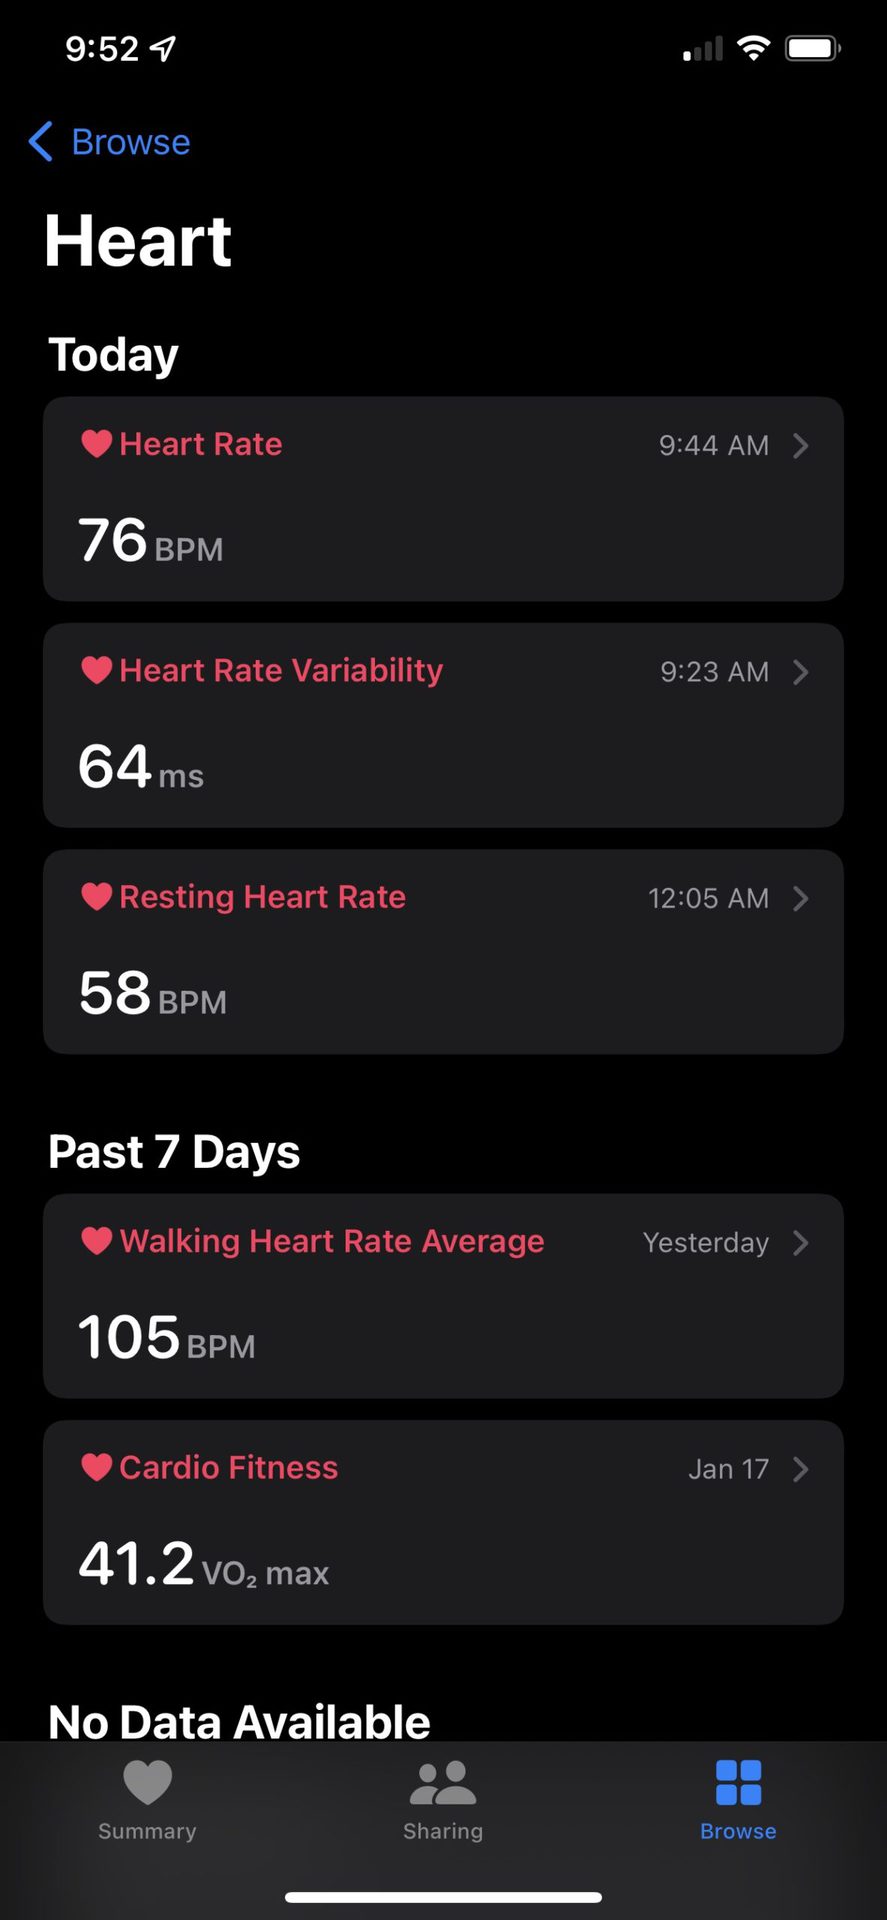 A screen shot of heart rate data on the Apple Health app includes, resting heart rate, heart variability, cardio fitness, and much more.